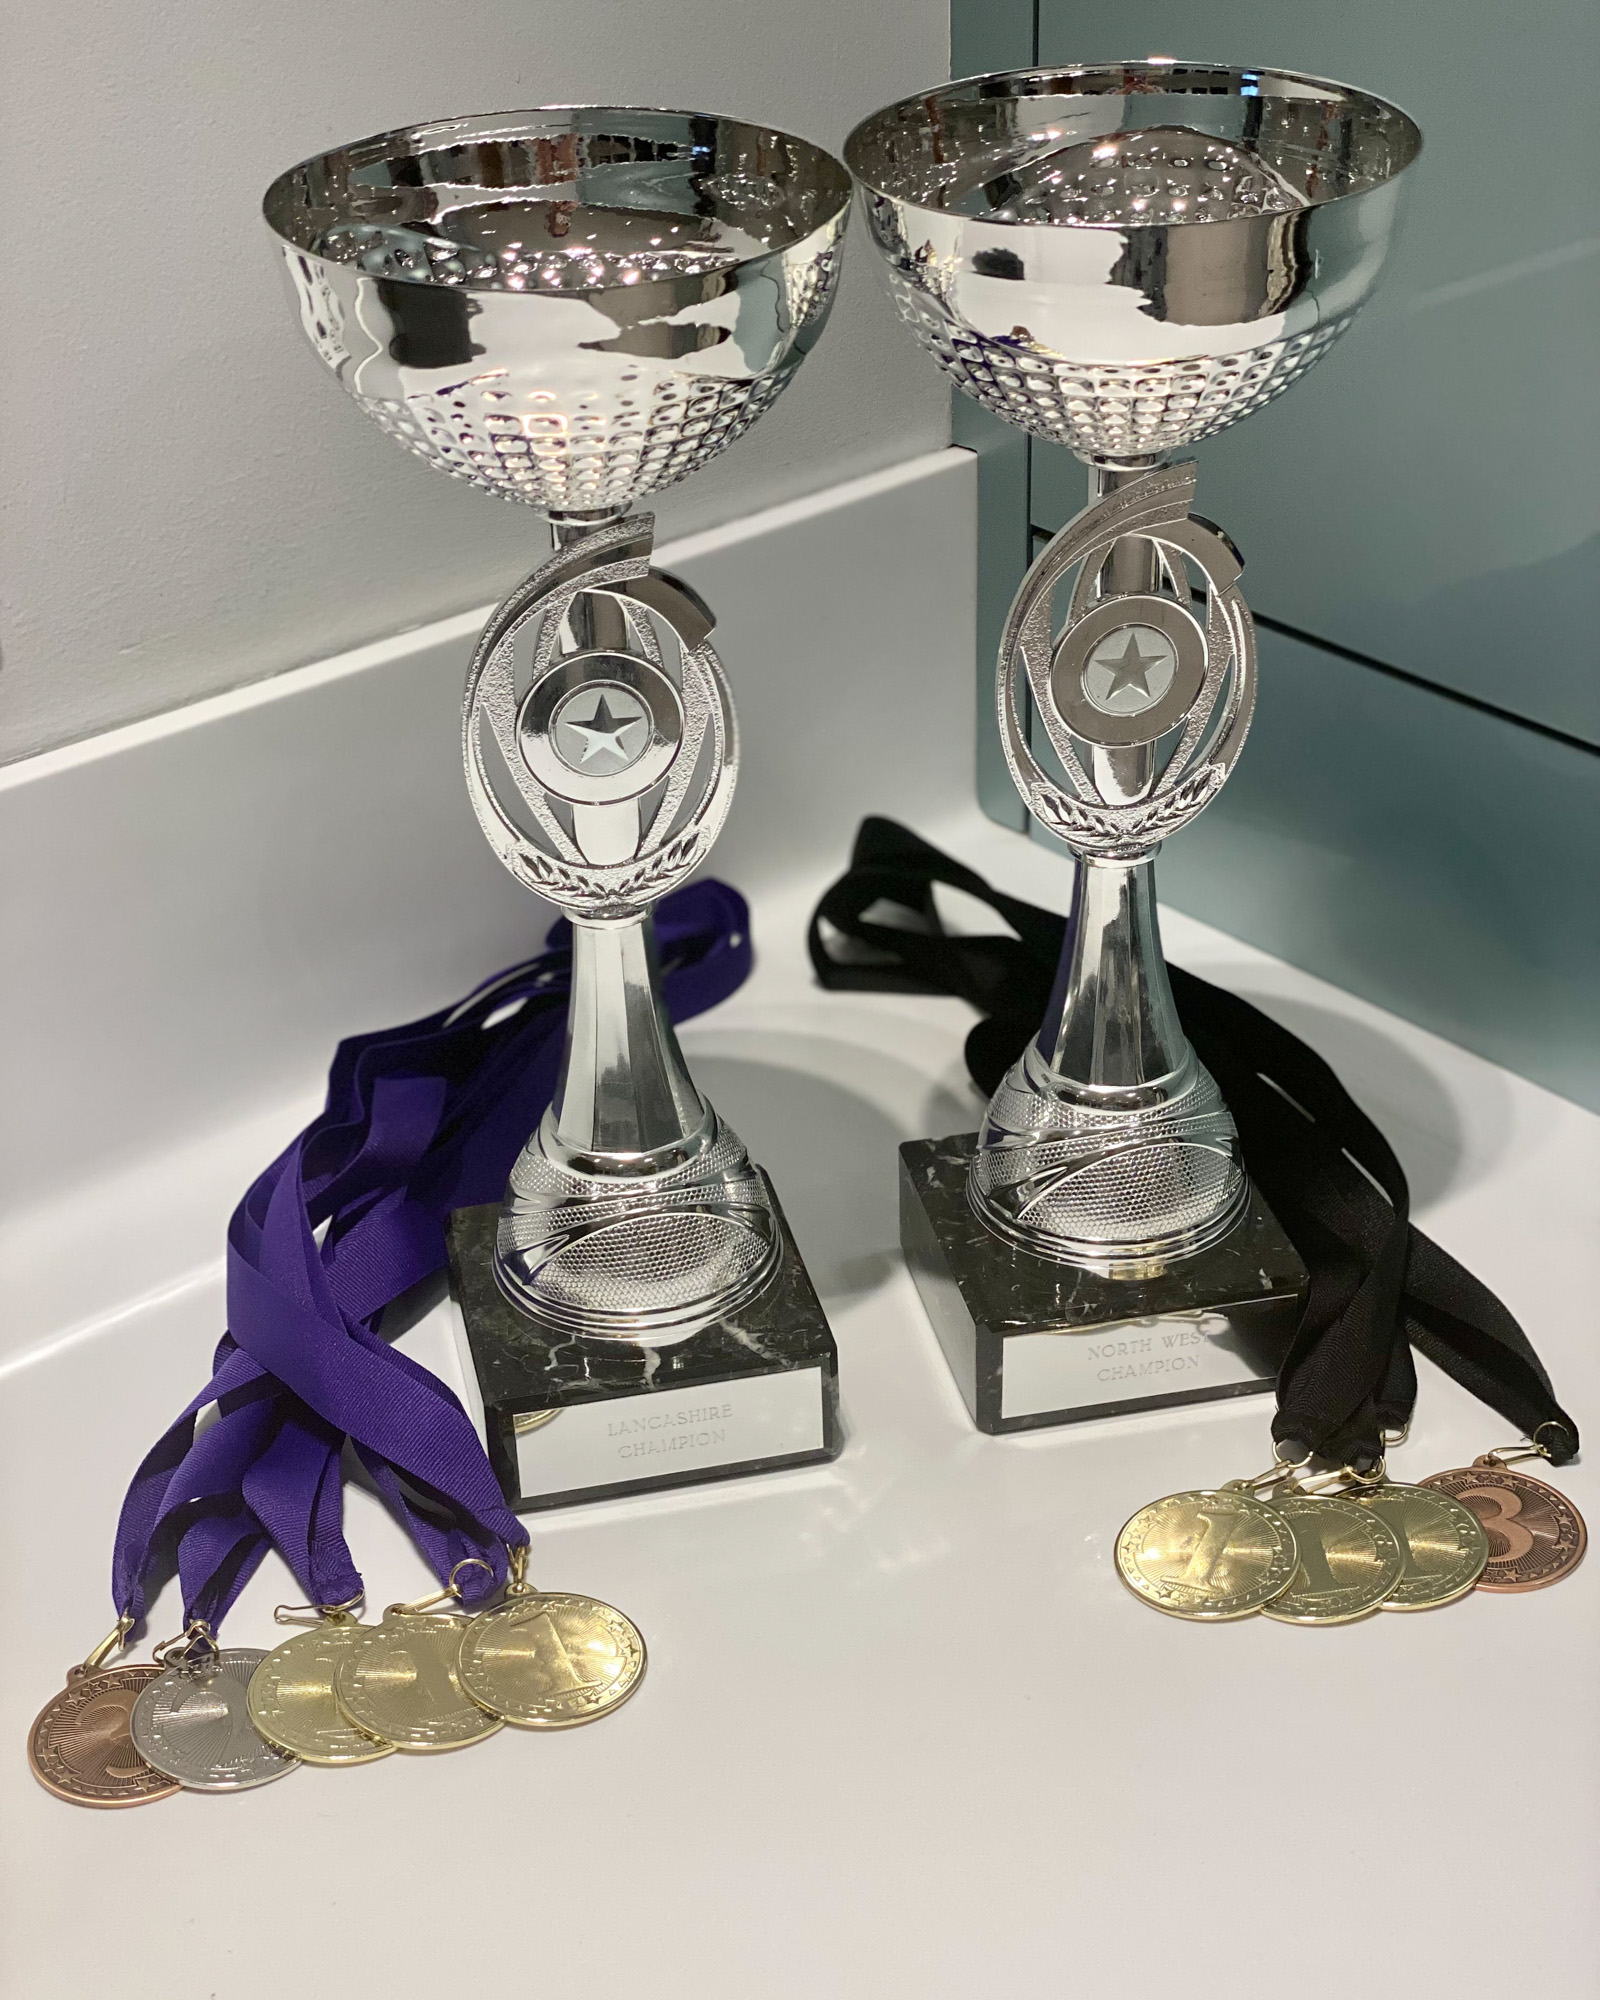 Ruby's impressive haul of trophies and medals